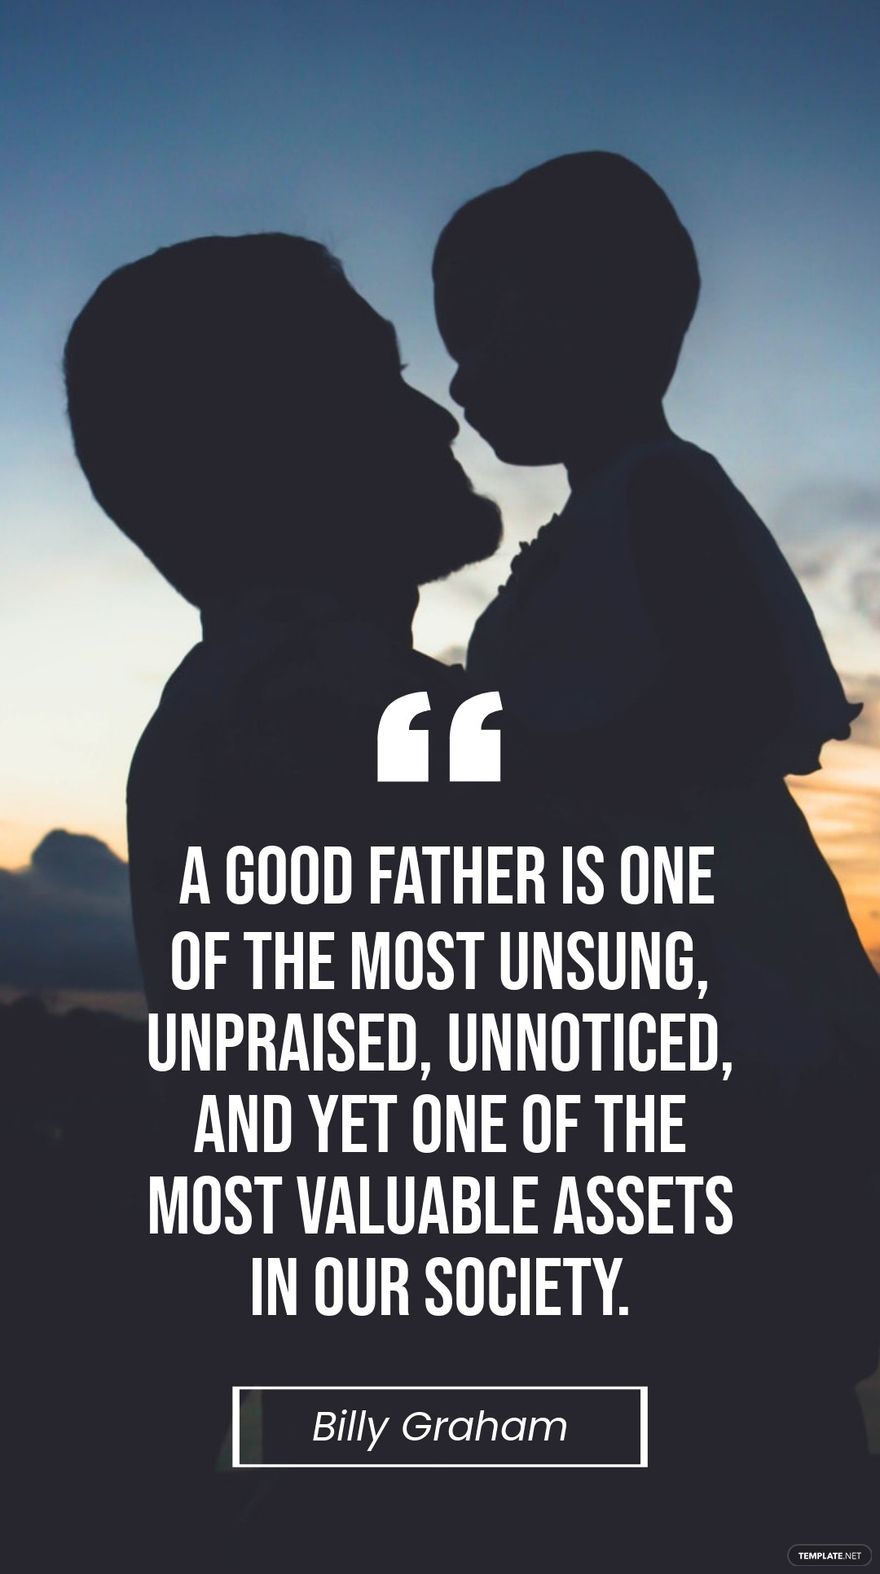 Free Billy Graham - A good father is one of the most unsung, unpraised, unnoticed, and yet one of the most valuable assets in our society. in JPG